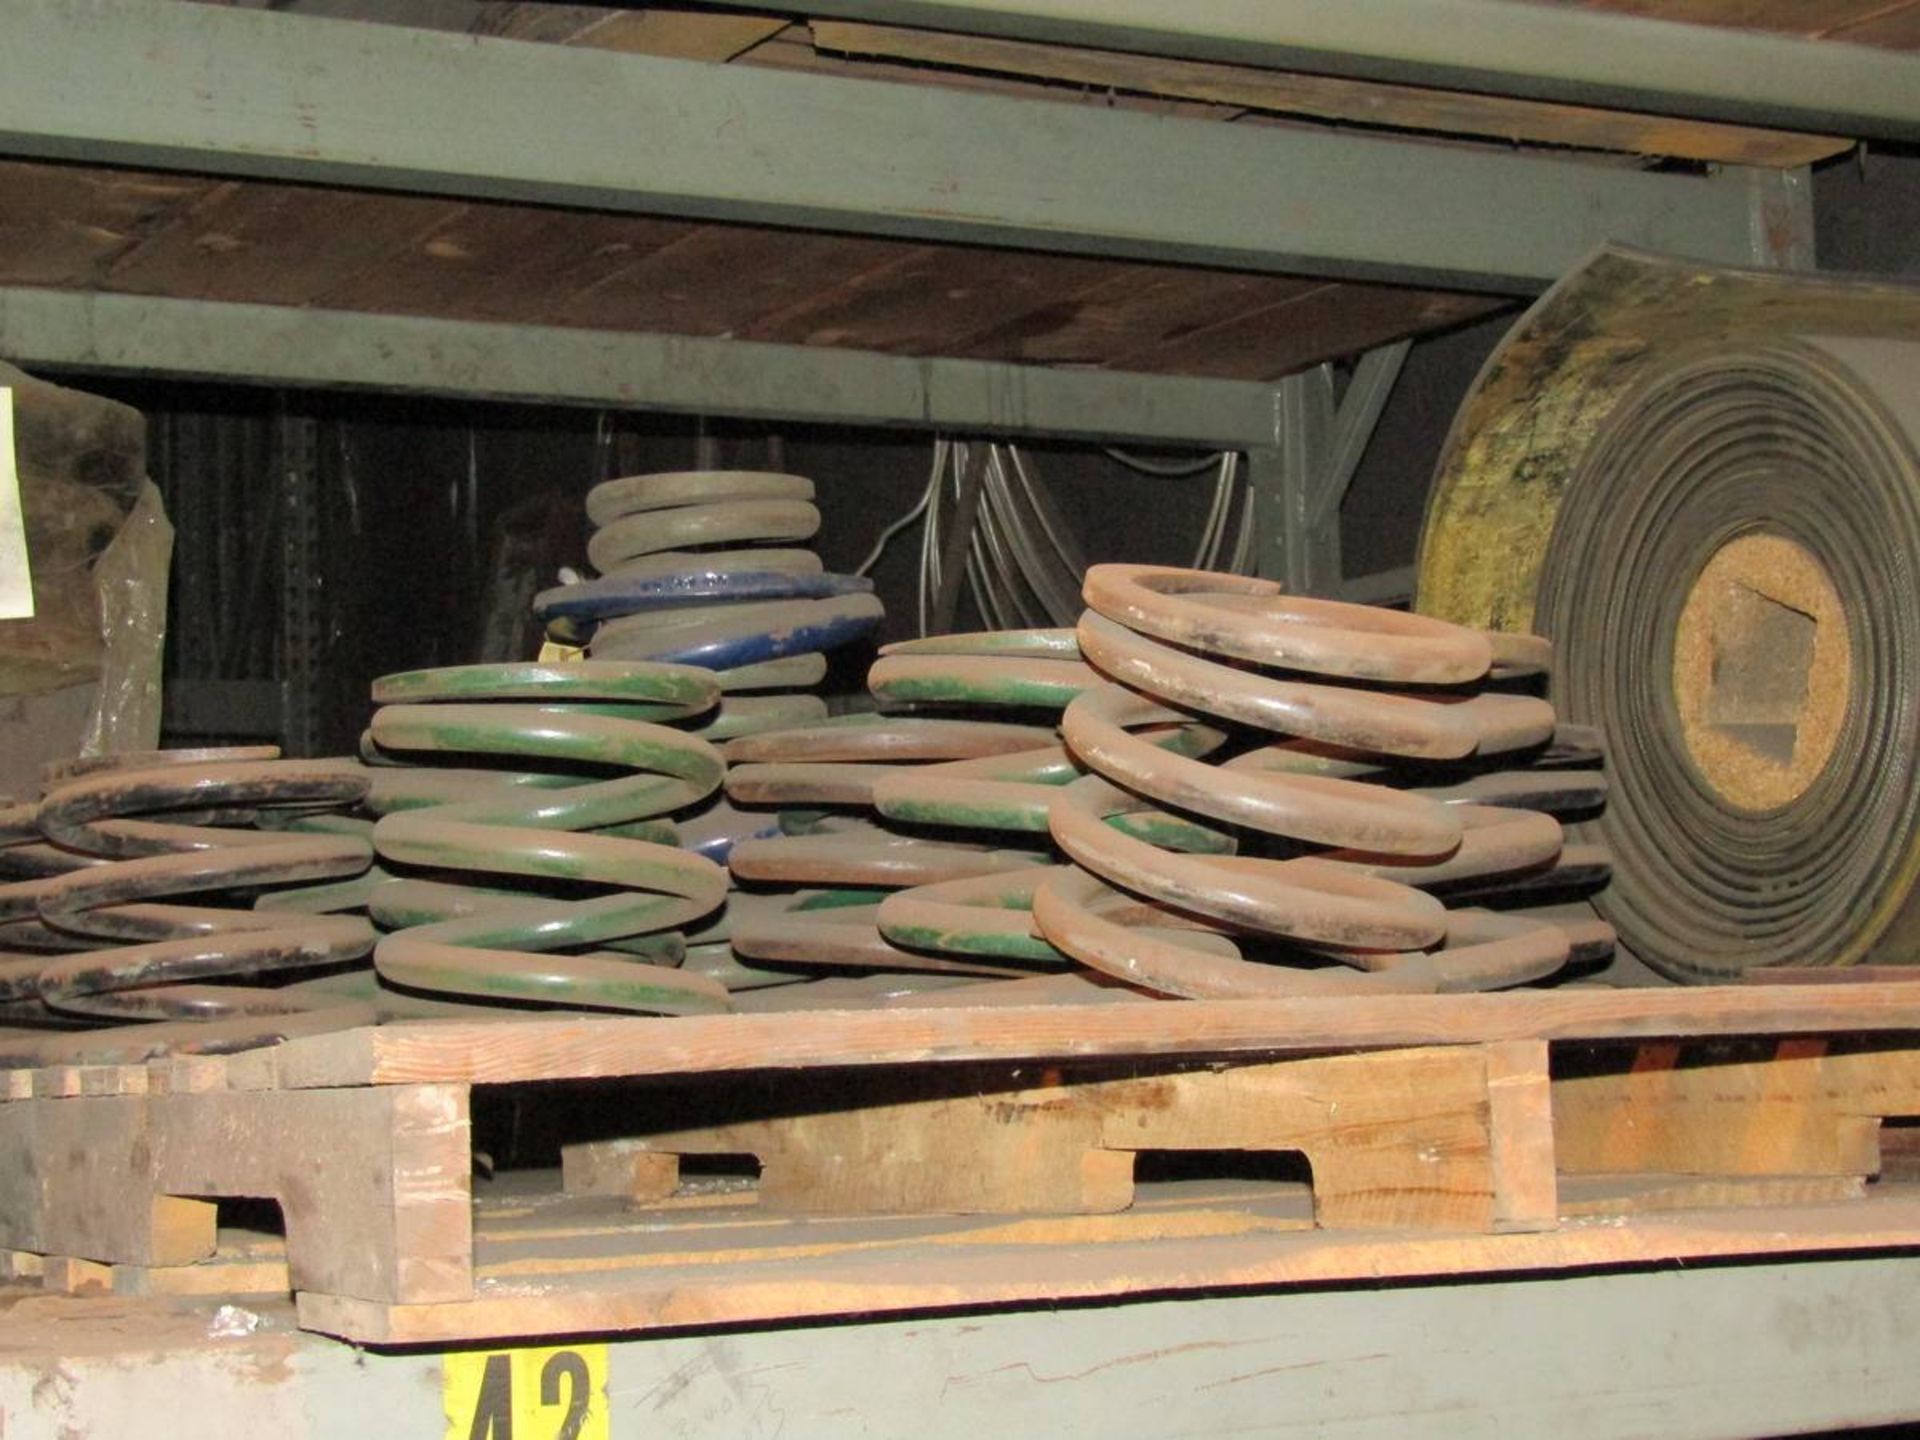 Lot of Assorted Shaker Conveyor Springs - Image 3 of 3